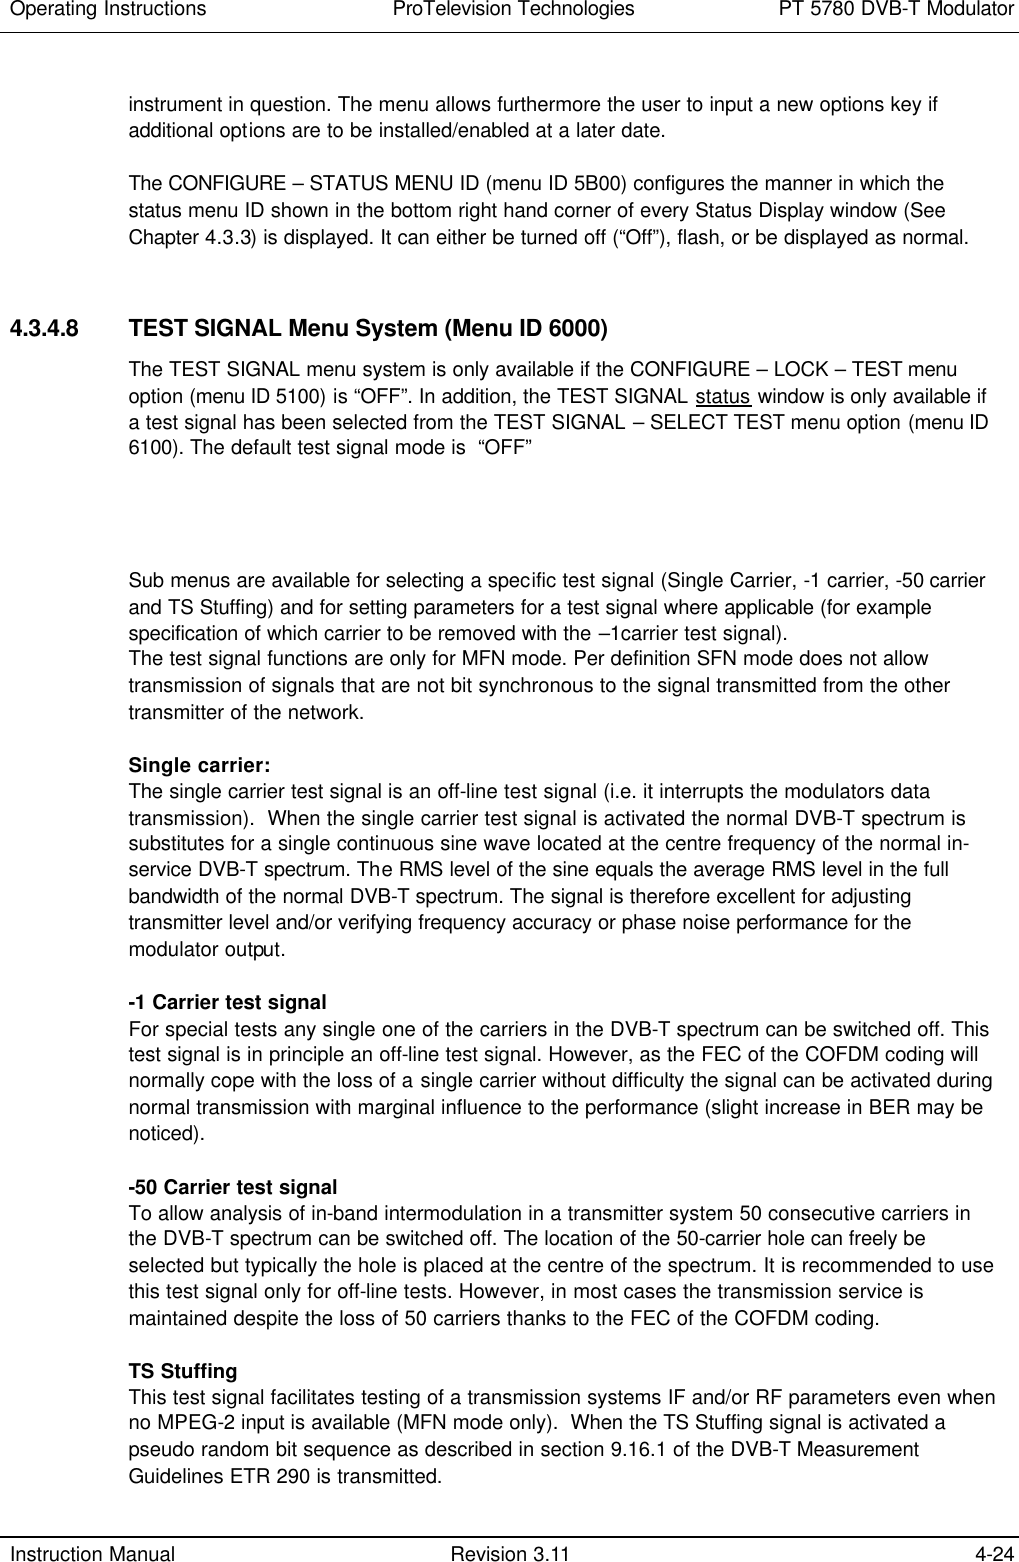 Operating Instructions  ProTelevision Technologies PT 5780 DVB-T Modulator  Instruction Manual Revision 3.11 4-24  instrument in question. The menu allows furthermore the user to input a new options key if additional options are to be installed/enabled at a later date.  The CONFIGURE – STATUS MENU ID (menu ID 5B00) configures the manner in which the status menu ID shown in the bottom right hand corner of every Status Display window (See Chapter 4.3.3) is displayed. It can either be turned off (“Off”), flash, or be displayed as normal.   4.3.4.8 TEST SIGNAL Menu System (Menu ID 6000) The TEST SIGNAL menu system is only available if the CONFIGURE – LOCK – TEST menu option (menu ID 5100) is “OFF”. In addition, the TEST SIGNAL status window is only available if a test signal has been selected from the TEST SIGNAL – SELECT TEST menu option (menu ID 6100). The default test signal mode is  “OFF”      Sub menus are available for selecting a specific test signal (Single Carrier, -1 carrier, -50 carrier and TS Stuffing) and for setting parameters for a test signal where applicable (for example specification of which carrier to be removed with the –1carrier test signal). The test signal functions are only for MFN mode. Per definition SFN mode does not allow transmission of signals that are not bit synchronous to the signal transmitted from the other transmitter of the network.  Single carrier: The single carrier test signal is an off-line test signal (i.e. it interrupts the modulators data transmission).  When the single carrier test signal is activated the normal DVB-T spectrum is substitutes for a single continuous sine wave located at the centre frequency of the normal in-service DVB-T spectrum. The RMS level of the sine equals the average RMS level in the full bandwidth of the normal DVB-T spectrum. The signal is therefore excellent for adjusting transmitter level and/or verifying frequency accuracy or phase noise performance for the modulator output.  -1 Carrier test signal For special tests any single one of the carriers in the DVB-T spectrum can be switched off. This test signal is in principle an off-line test signal. However, as the FEC of the COFDM coding will normally cope with the loss of a single carrier without difficulty the signal can be activated during normal transmission with marginal influence to the performance (slight increase in BER may be noticed).  -50 Carrier test signal To allow analysis of in-band intermodulation in a transmitter system 50 consecutive carriers in the DVB-T spectrum can be switched off. The location of the 50-carrier hole can freely be selected but typically the hole is placed at the centre of the spectrum. It is recommended to use this test signal only for off-line tests. However, in most cases the transmission service is maintained despite the loss of 50 carriers thanks to the FEC of the COFDM coding.   TS Stuffing This test signal facilitates testing of a transmission systems IF and/or RF parameters even when no MPEG-2 input is available (MFN mode only).  When the TS Stuffing signal is activated a pseudo random bit sequence as described in section 9.16.1 of the DVB-T Measurement Guidelines ETR 290 is transmitted. 